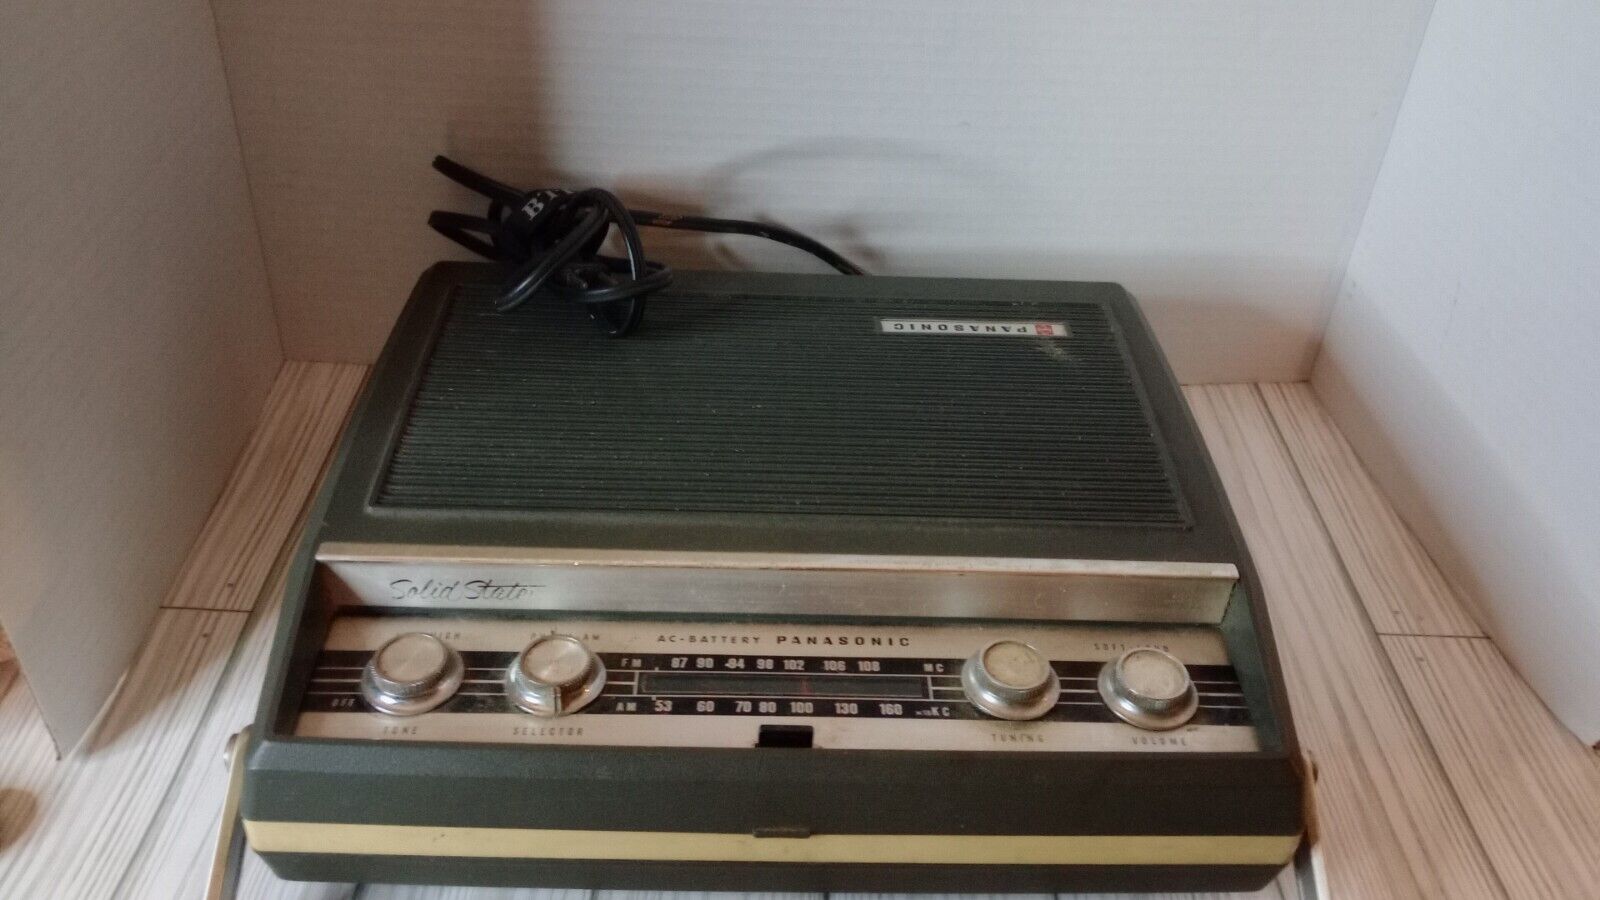 Panasonic SG-571  FM-AM Phono Portable Tested and Working